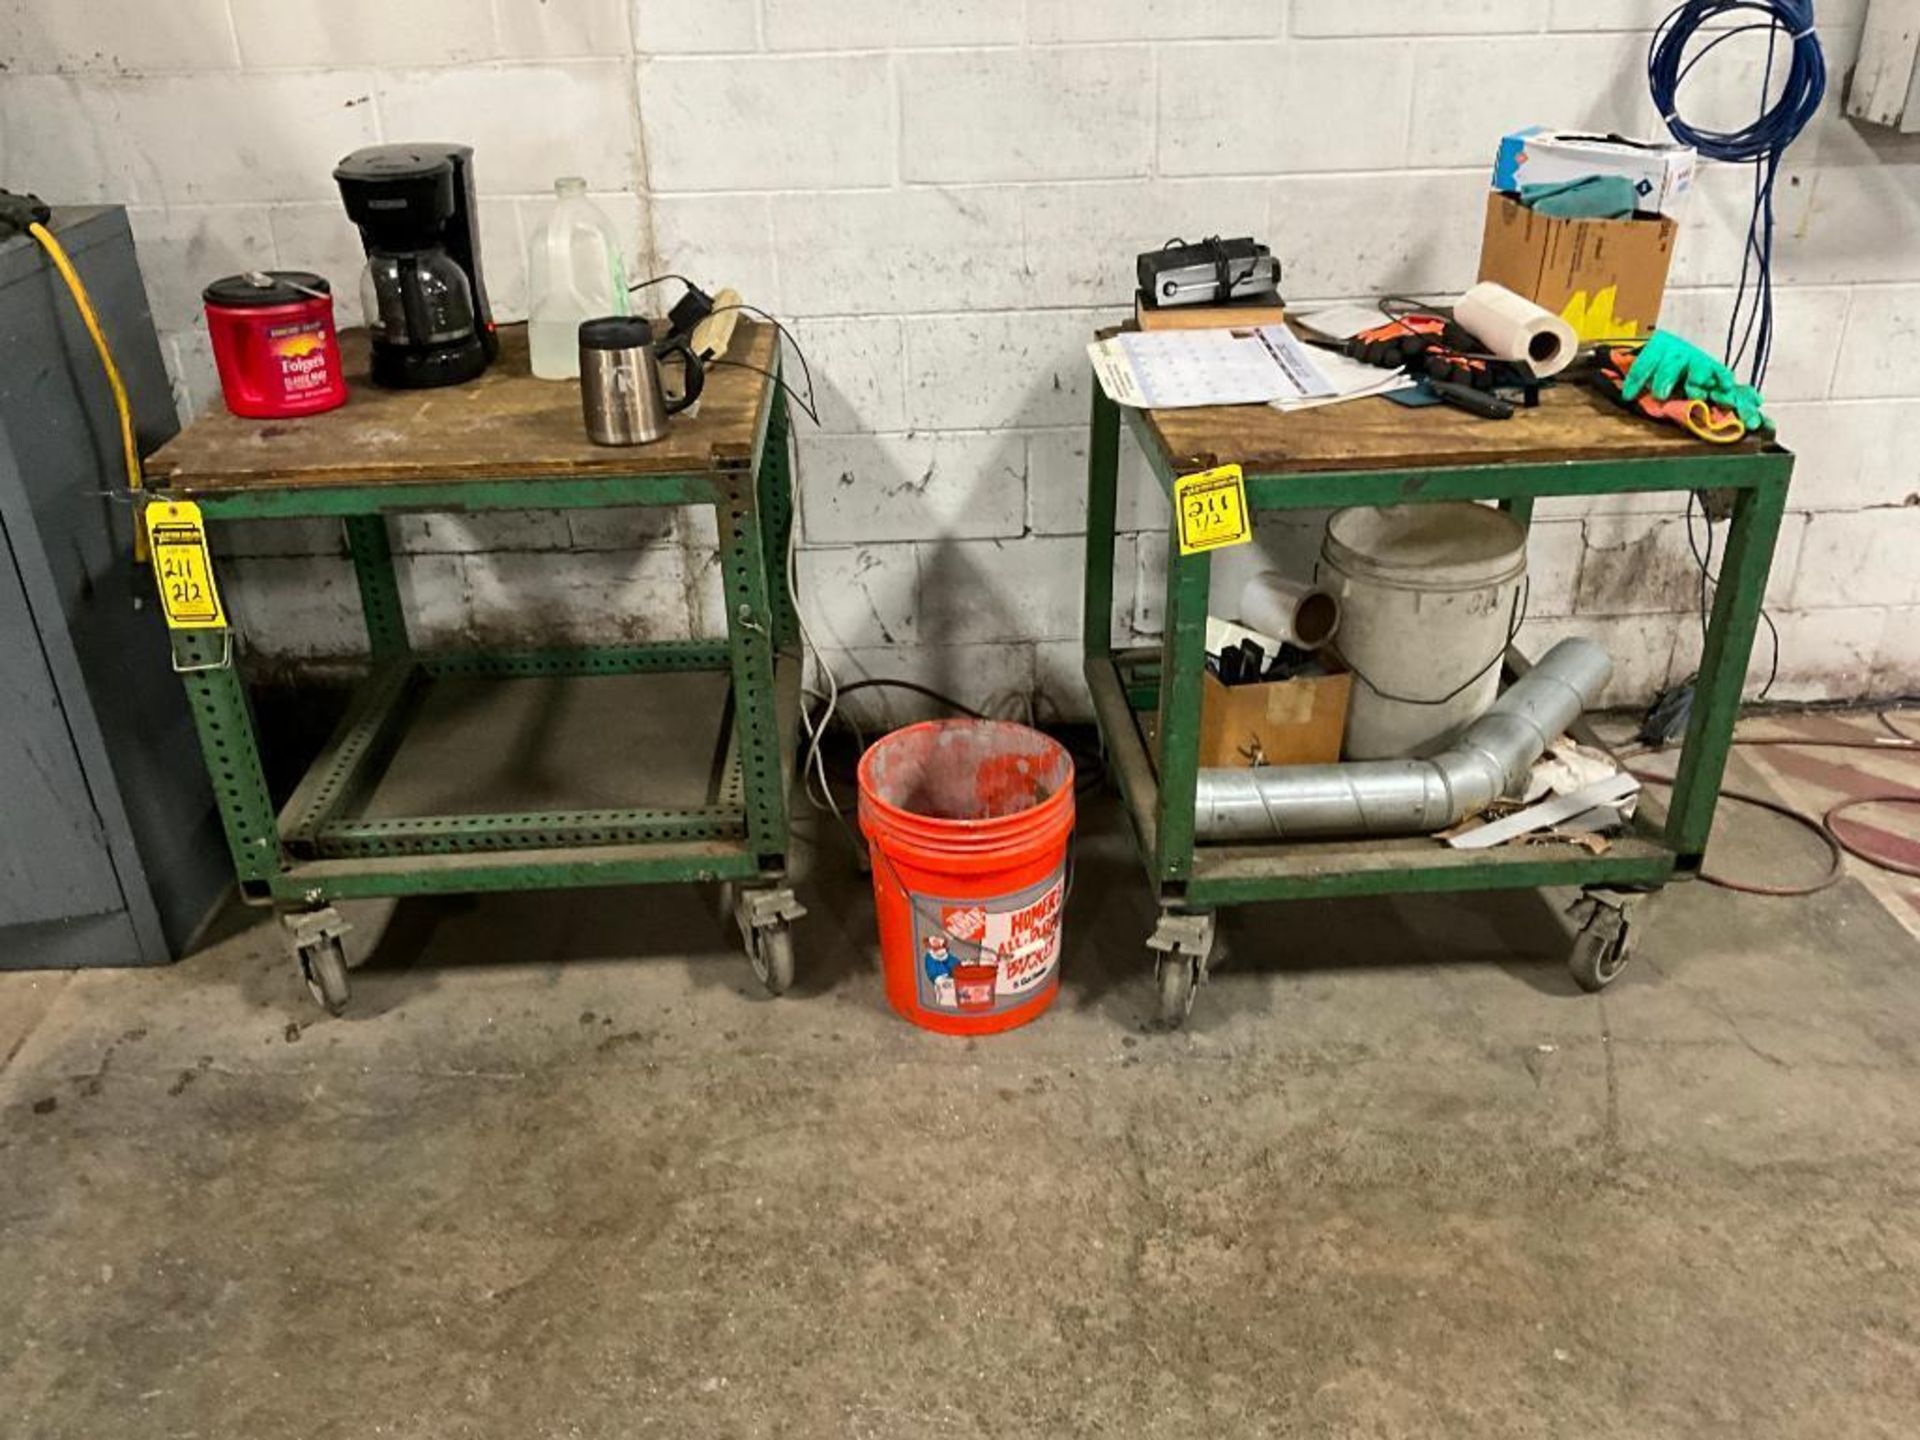 (2) Carts on Casters, 33" H x 38" W x 38" D